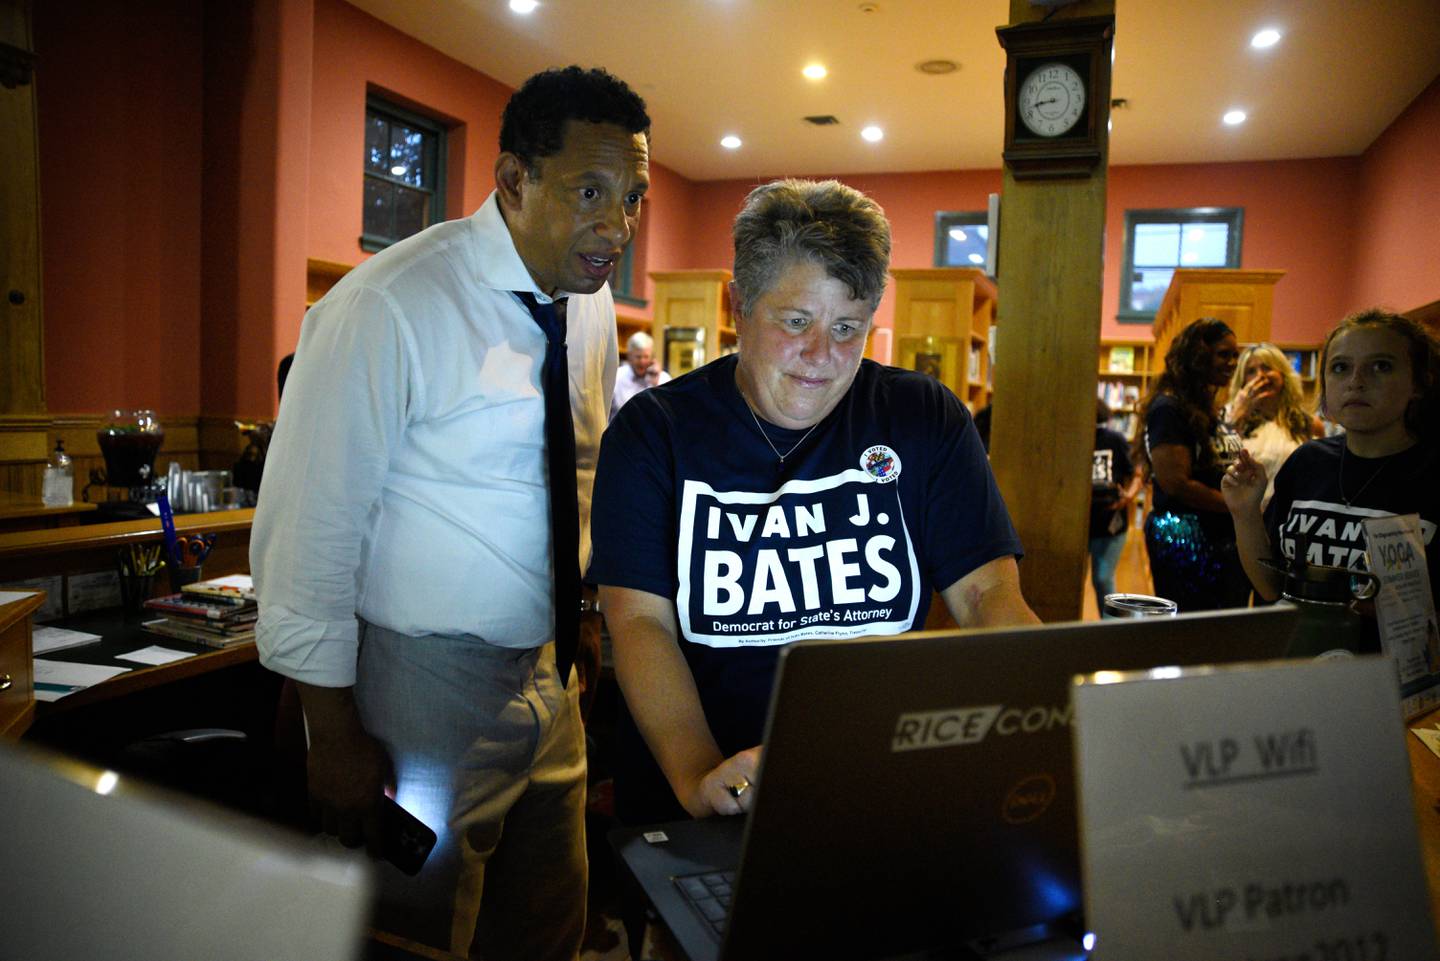 Baltimore City State's Attorney candidate Ivan Bates (left) and Rachael Rice (right) watch results come in at Bates' election night event. Maryland held its primary election on Tuesday, July 19.